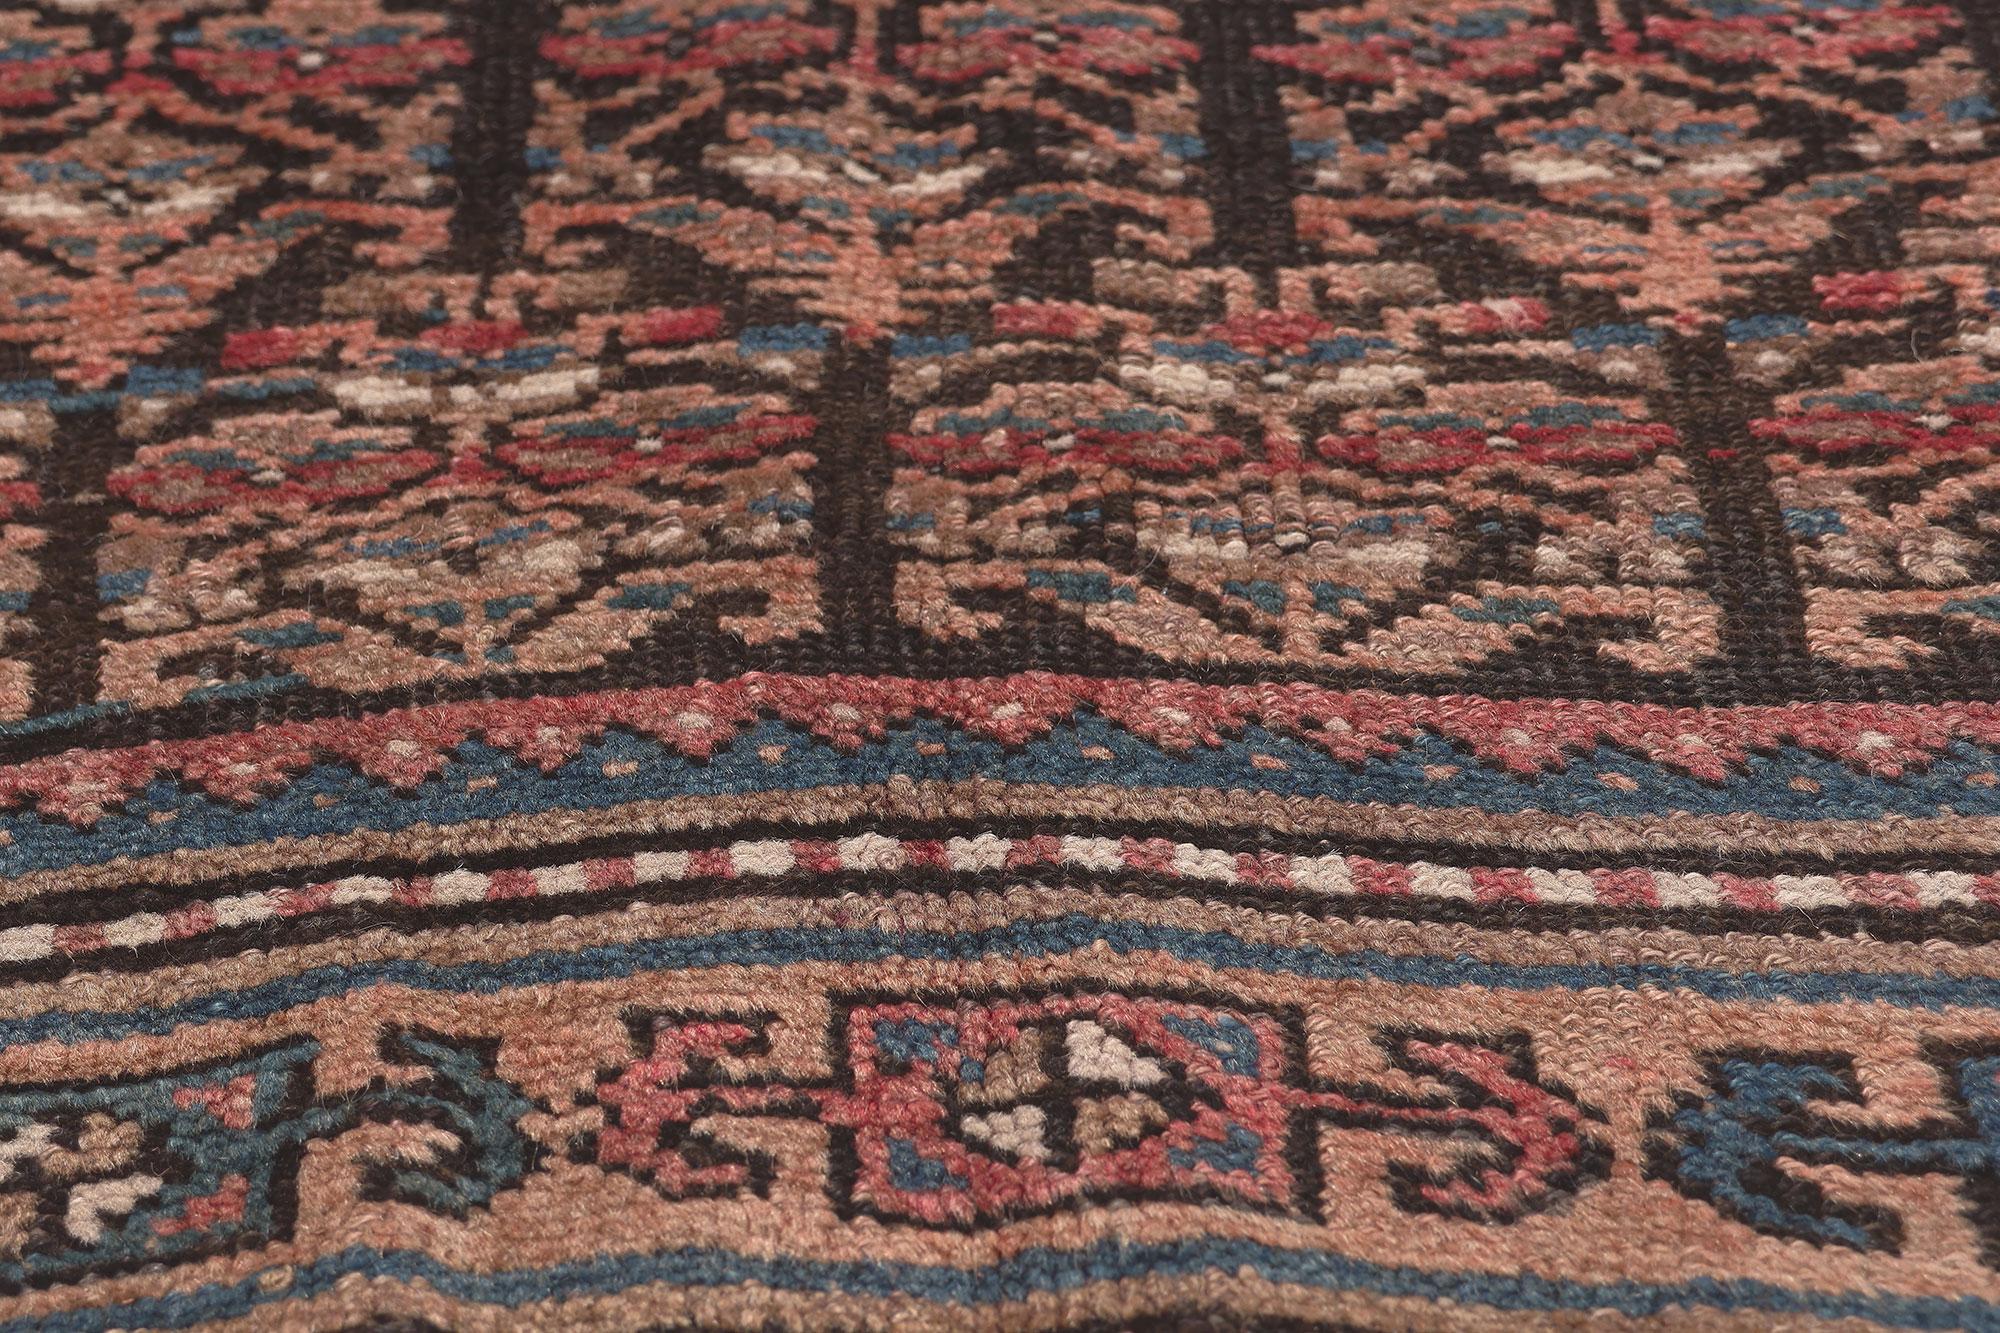 Antique Persian Kurdish Rug, Rugged Beauty Meets Laid-Back Luxury In Good Condition For Sale In Dallas, TX